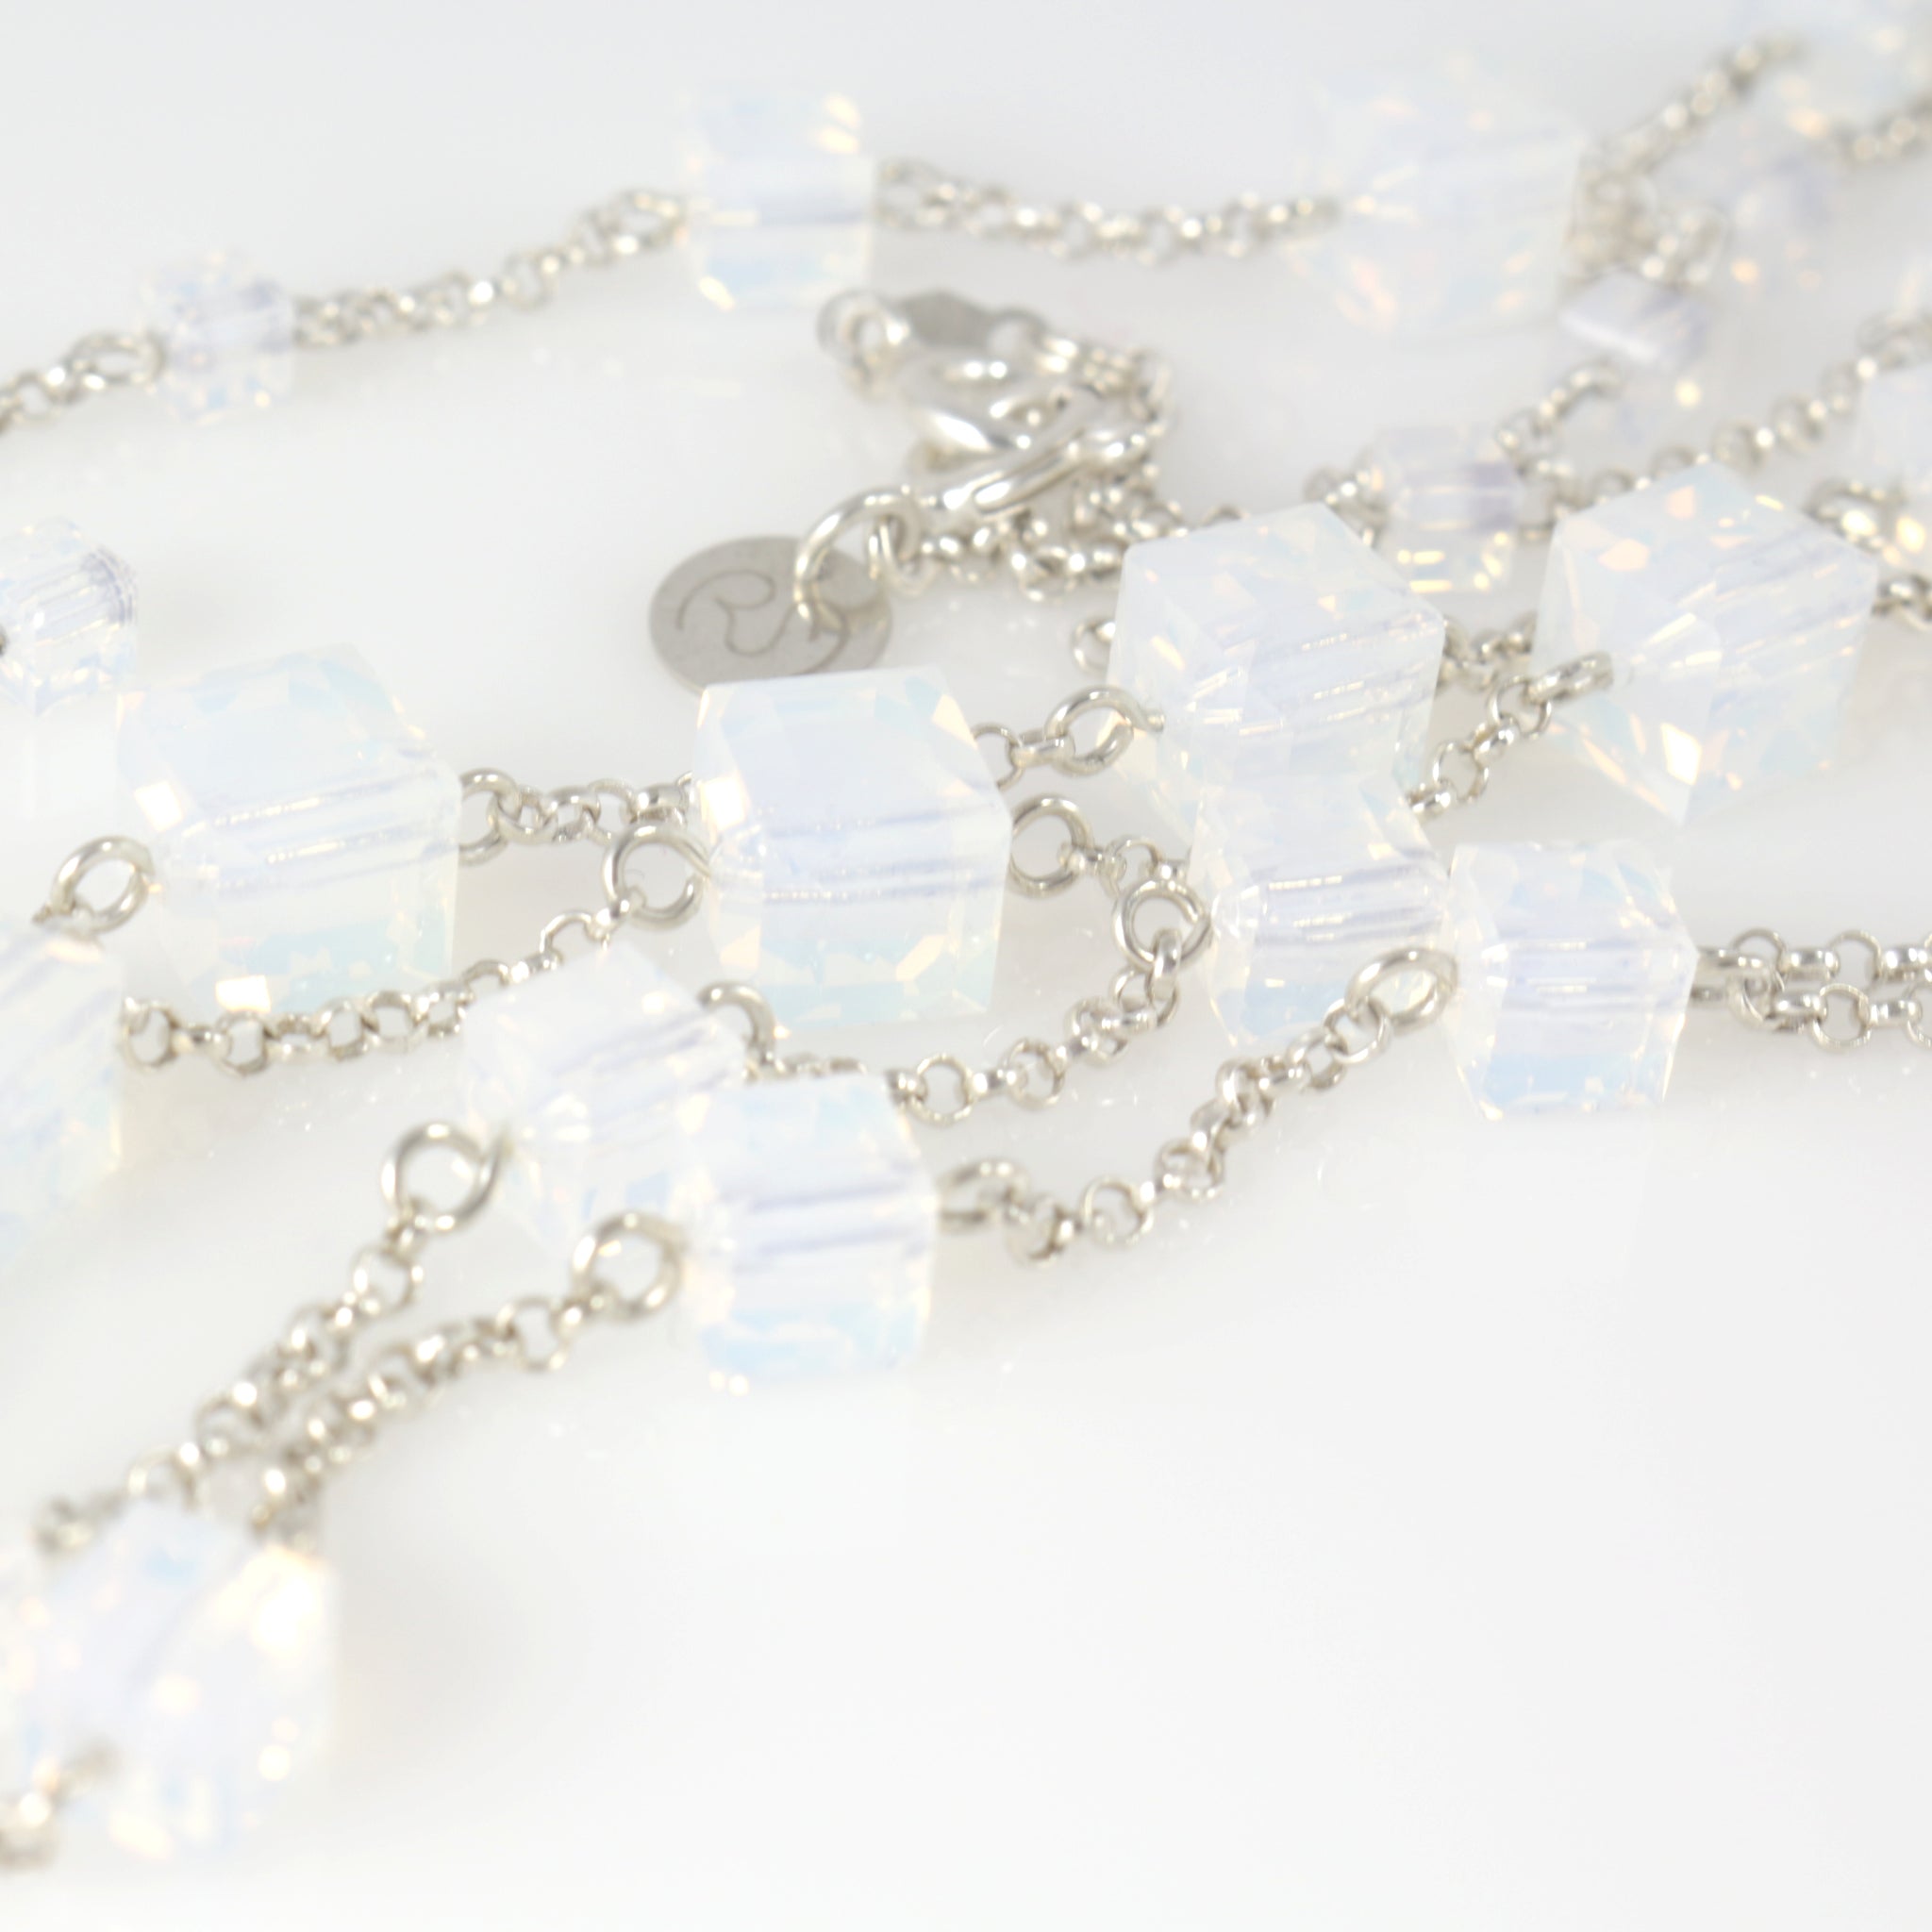 Windows Change-ABLE Necklace in White Opal